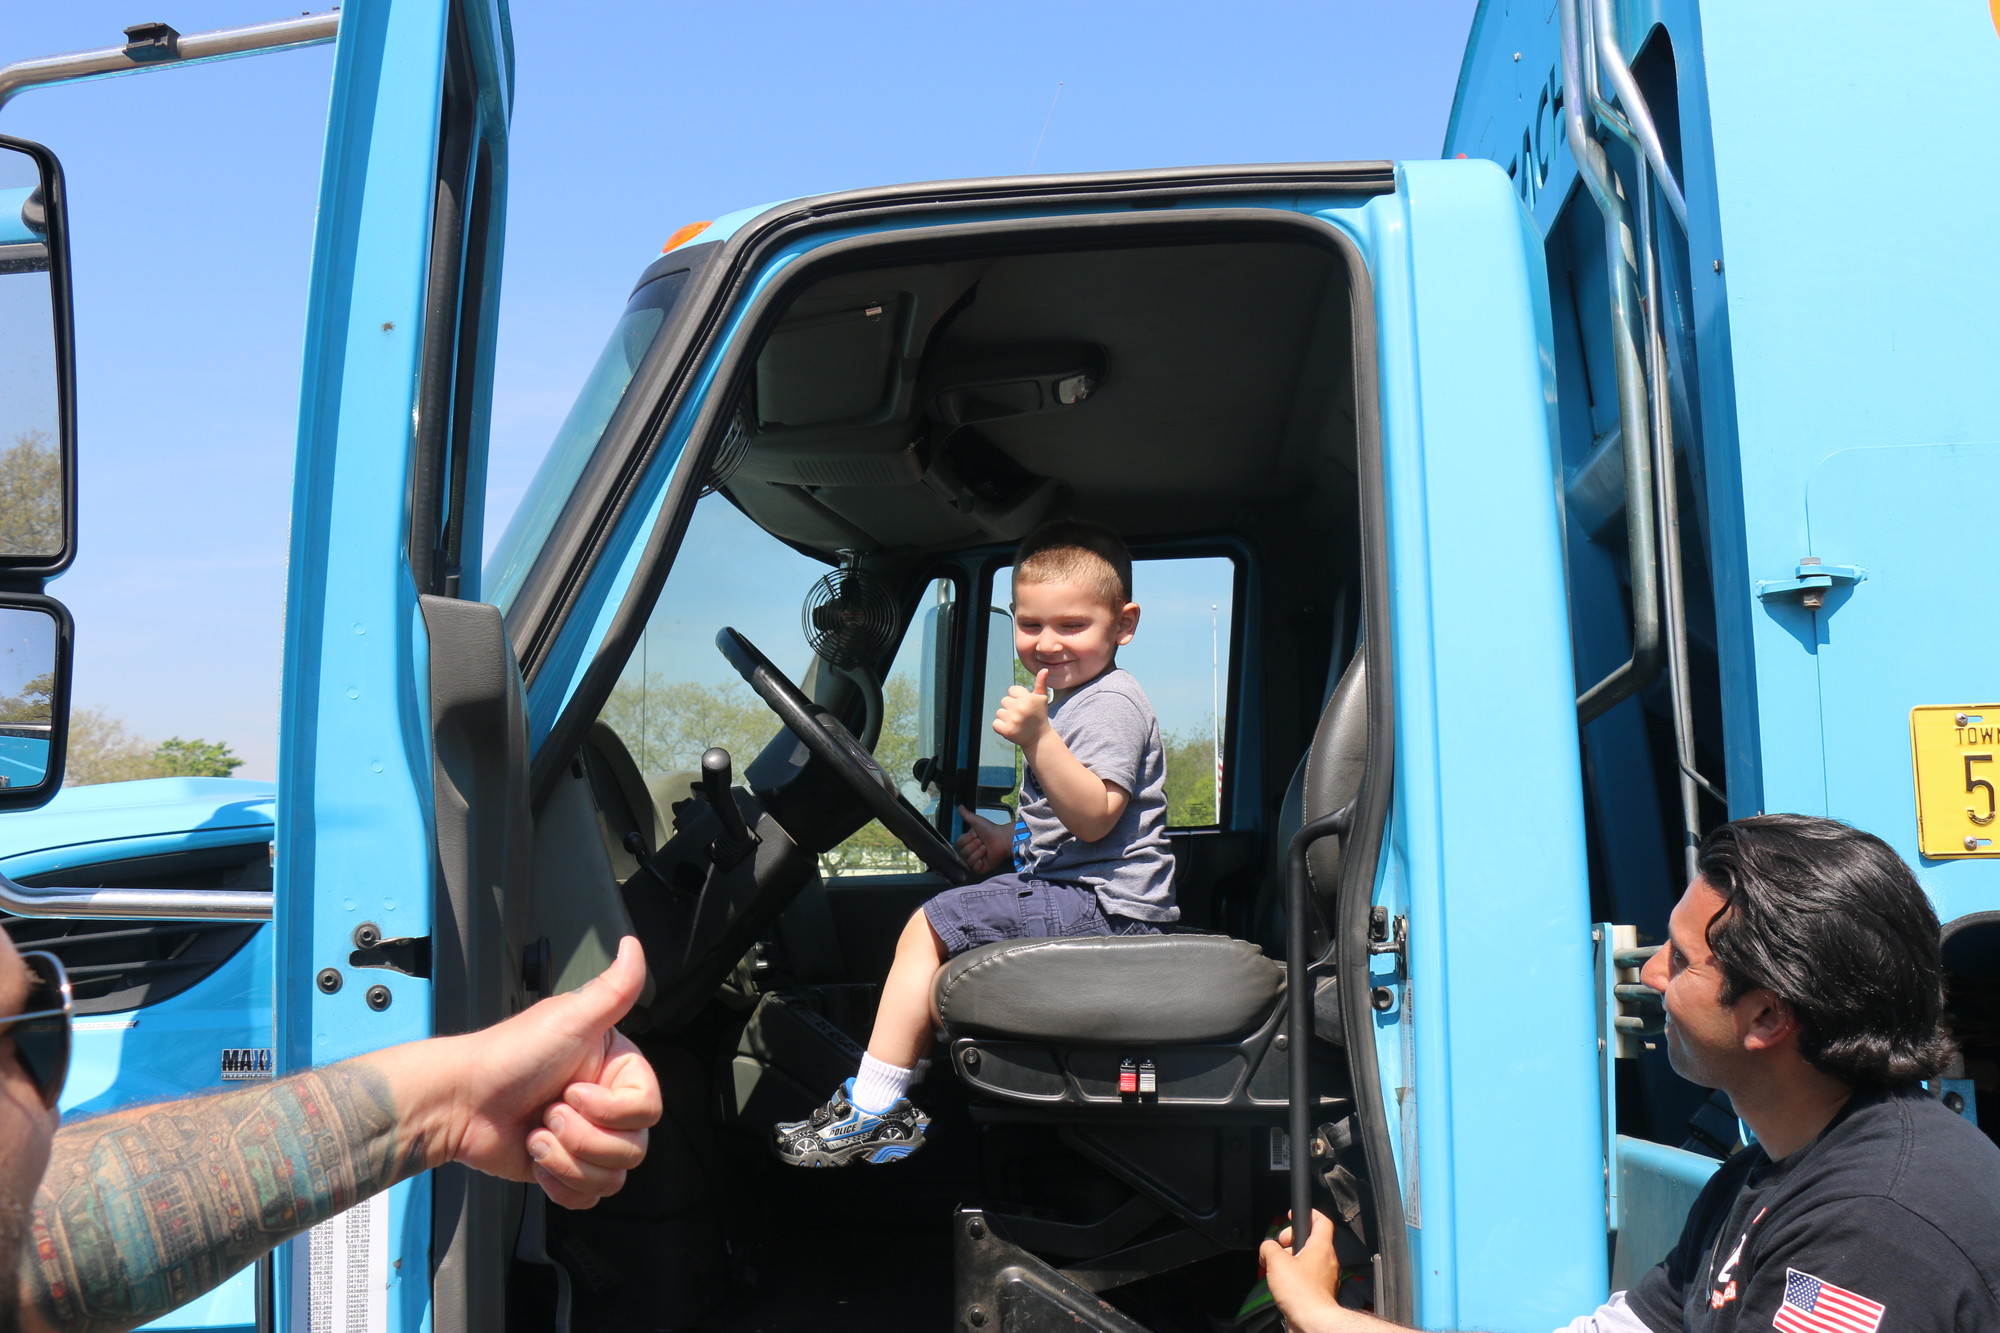 Alex Scarangella, 3, enjoyed sitting in the driver’s seat of a village truck. Its horn was a popular feature among the kids.